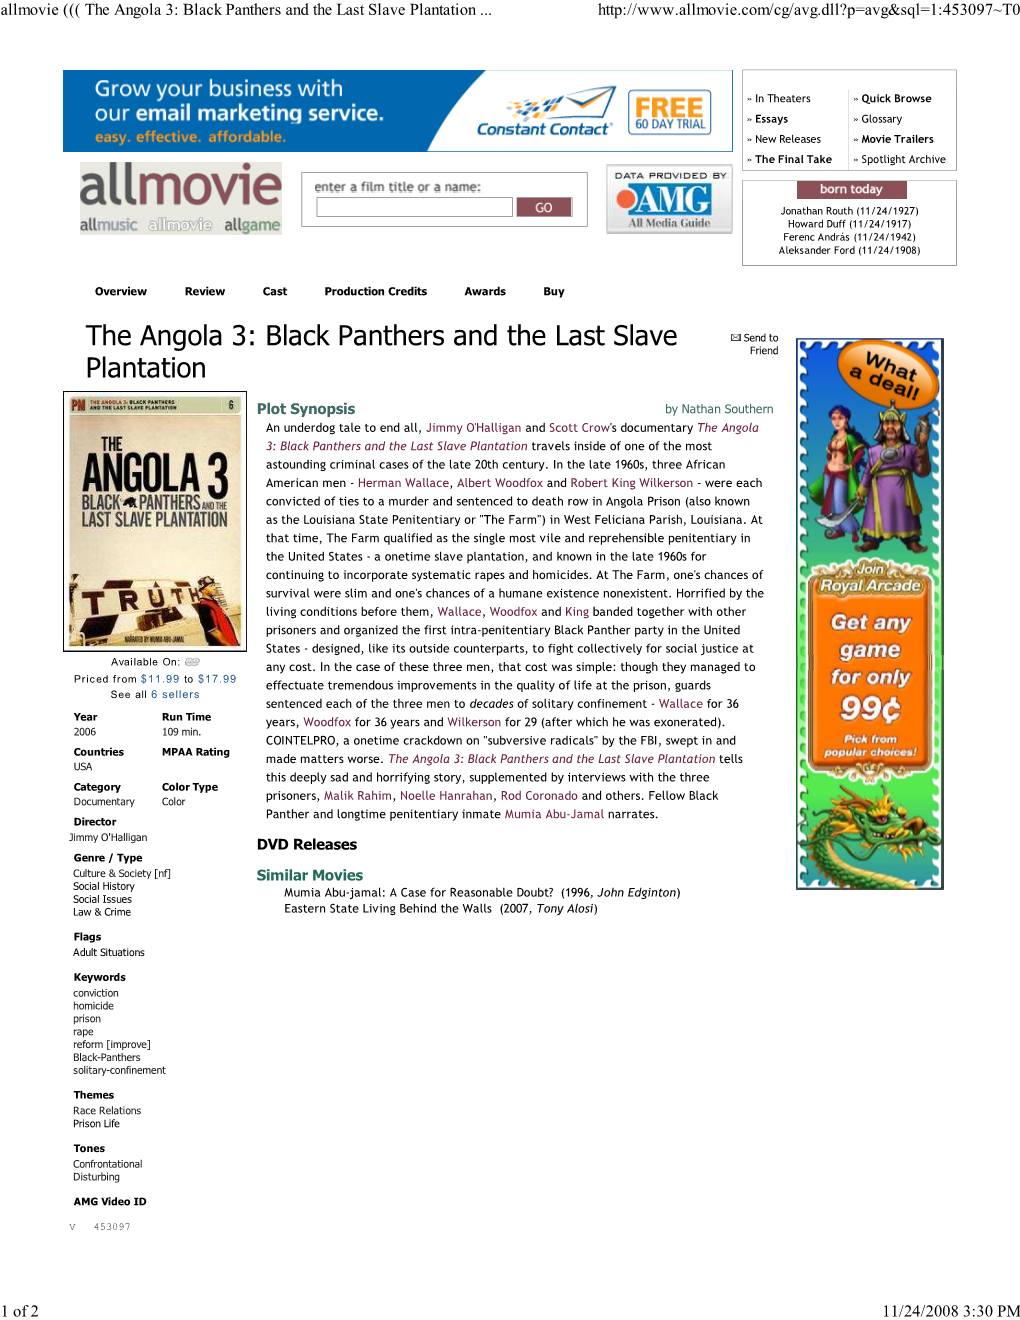 Allmovie ((( the Angola 3: Black Panthers and the Last Slave Plantation